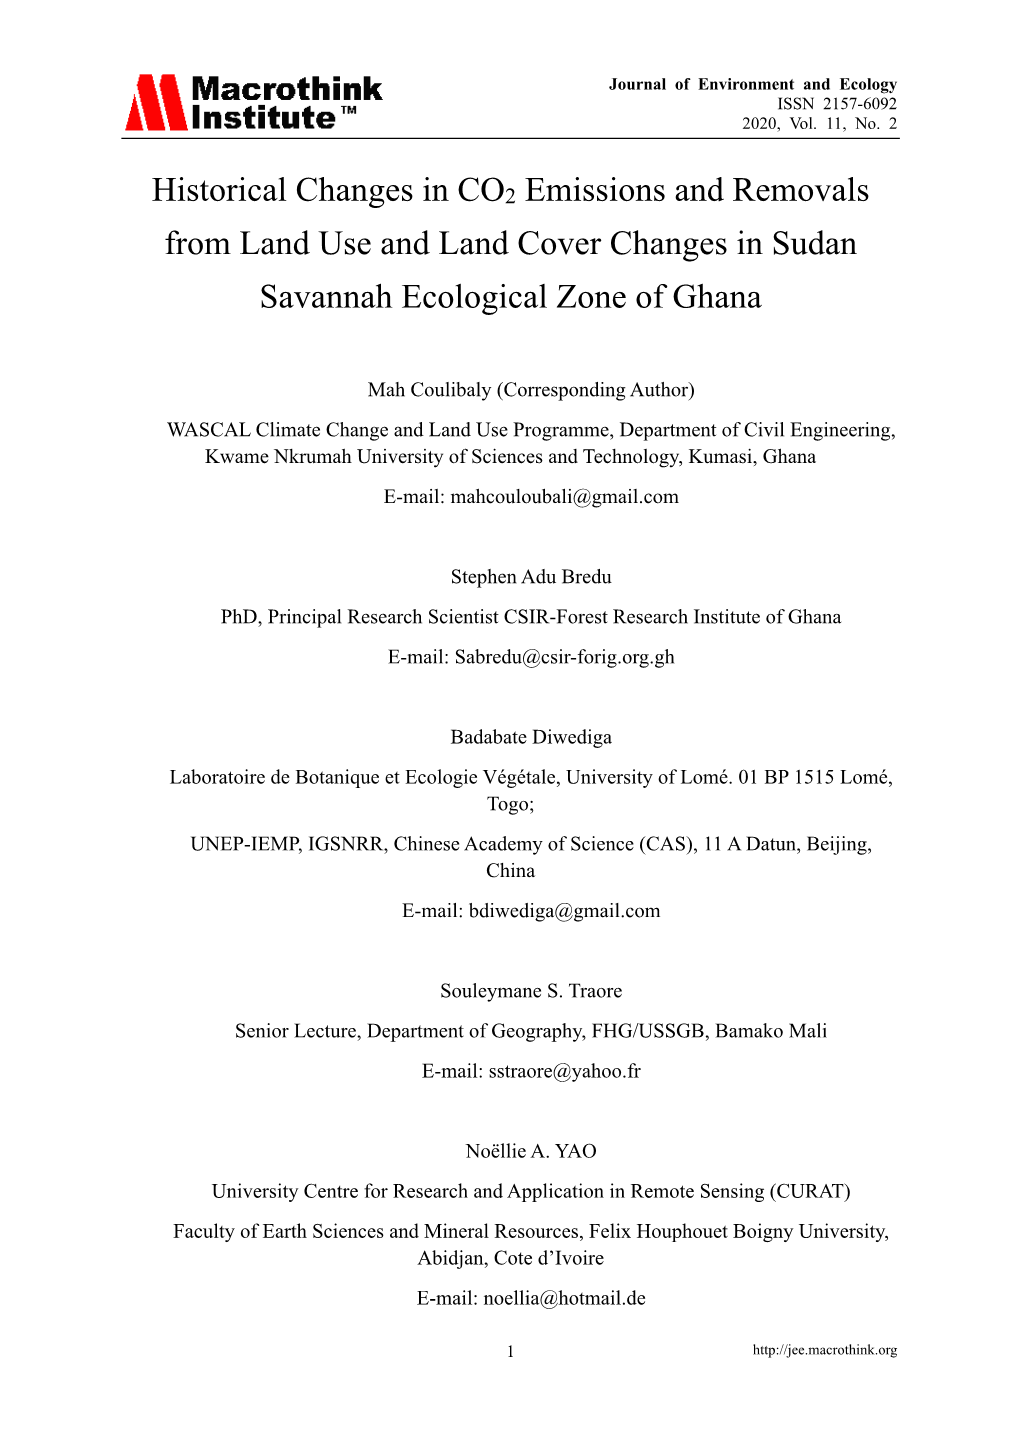 Historical Changes in CO2 Emissions and Removals from Land Use and Land Cover Changes in Sudan Savannah Ecological Zone of Ghana